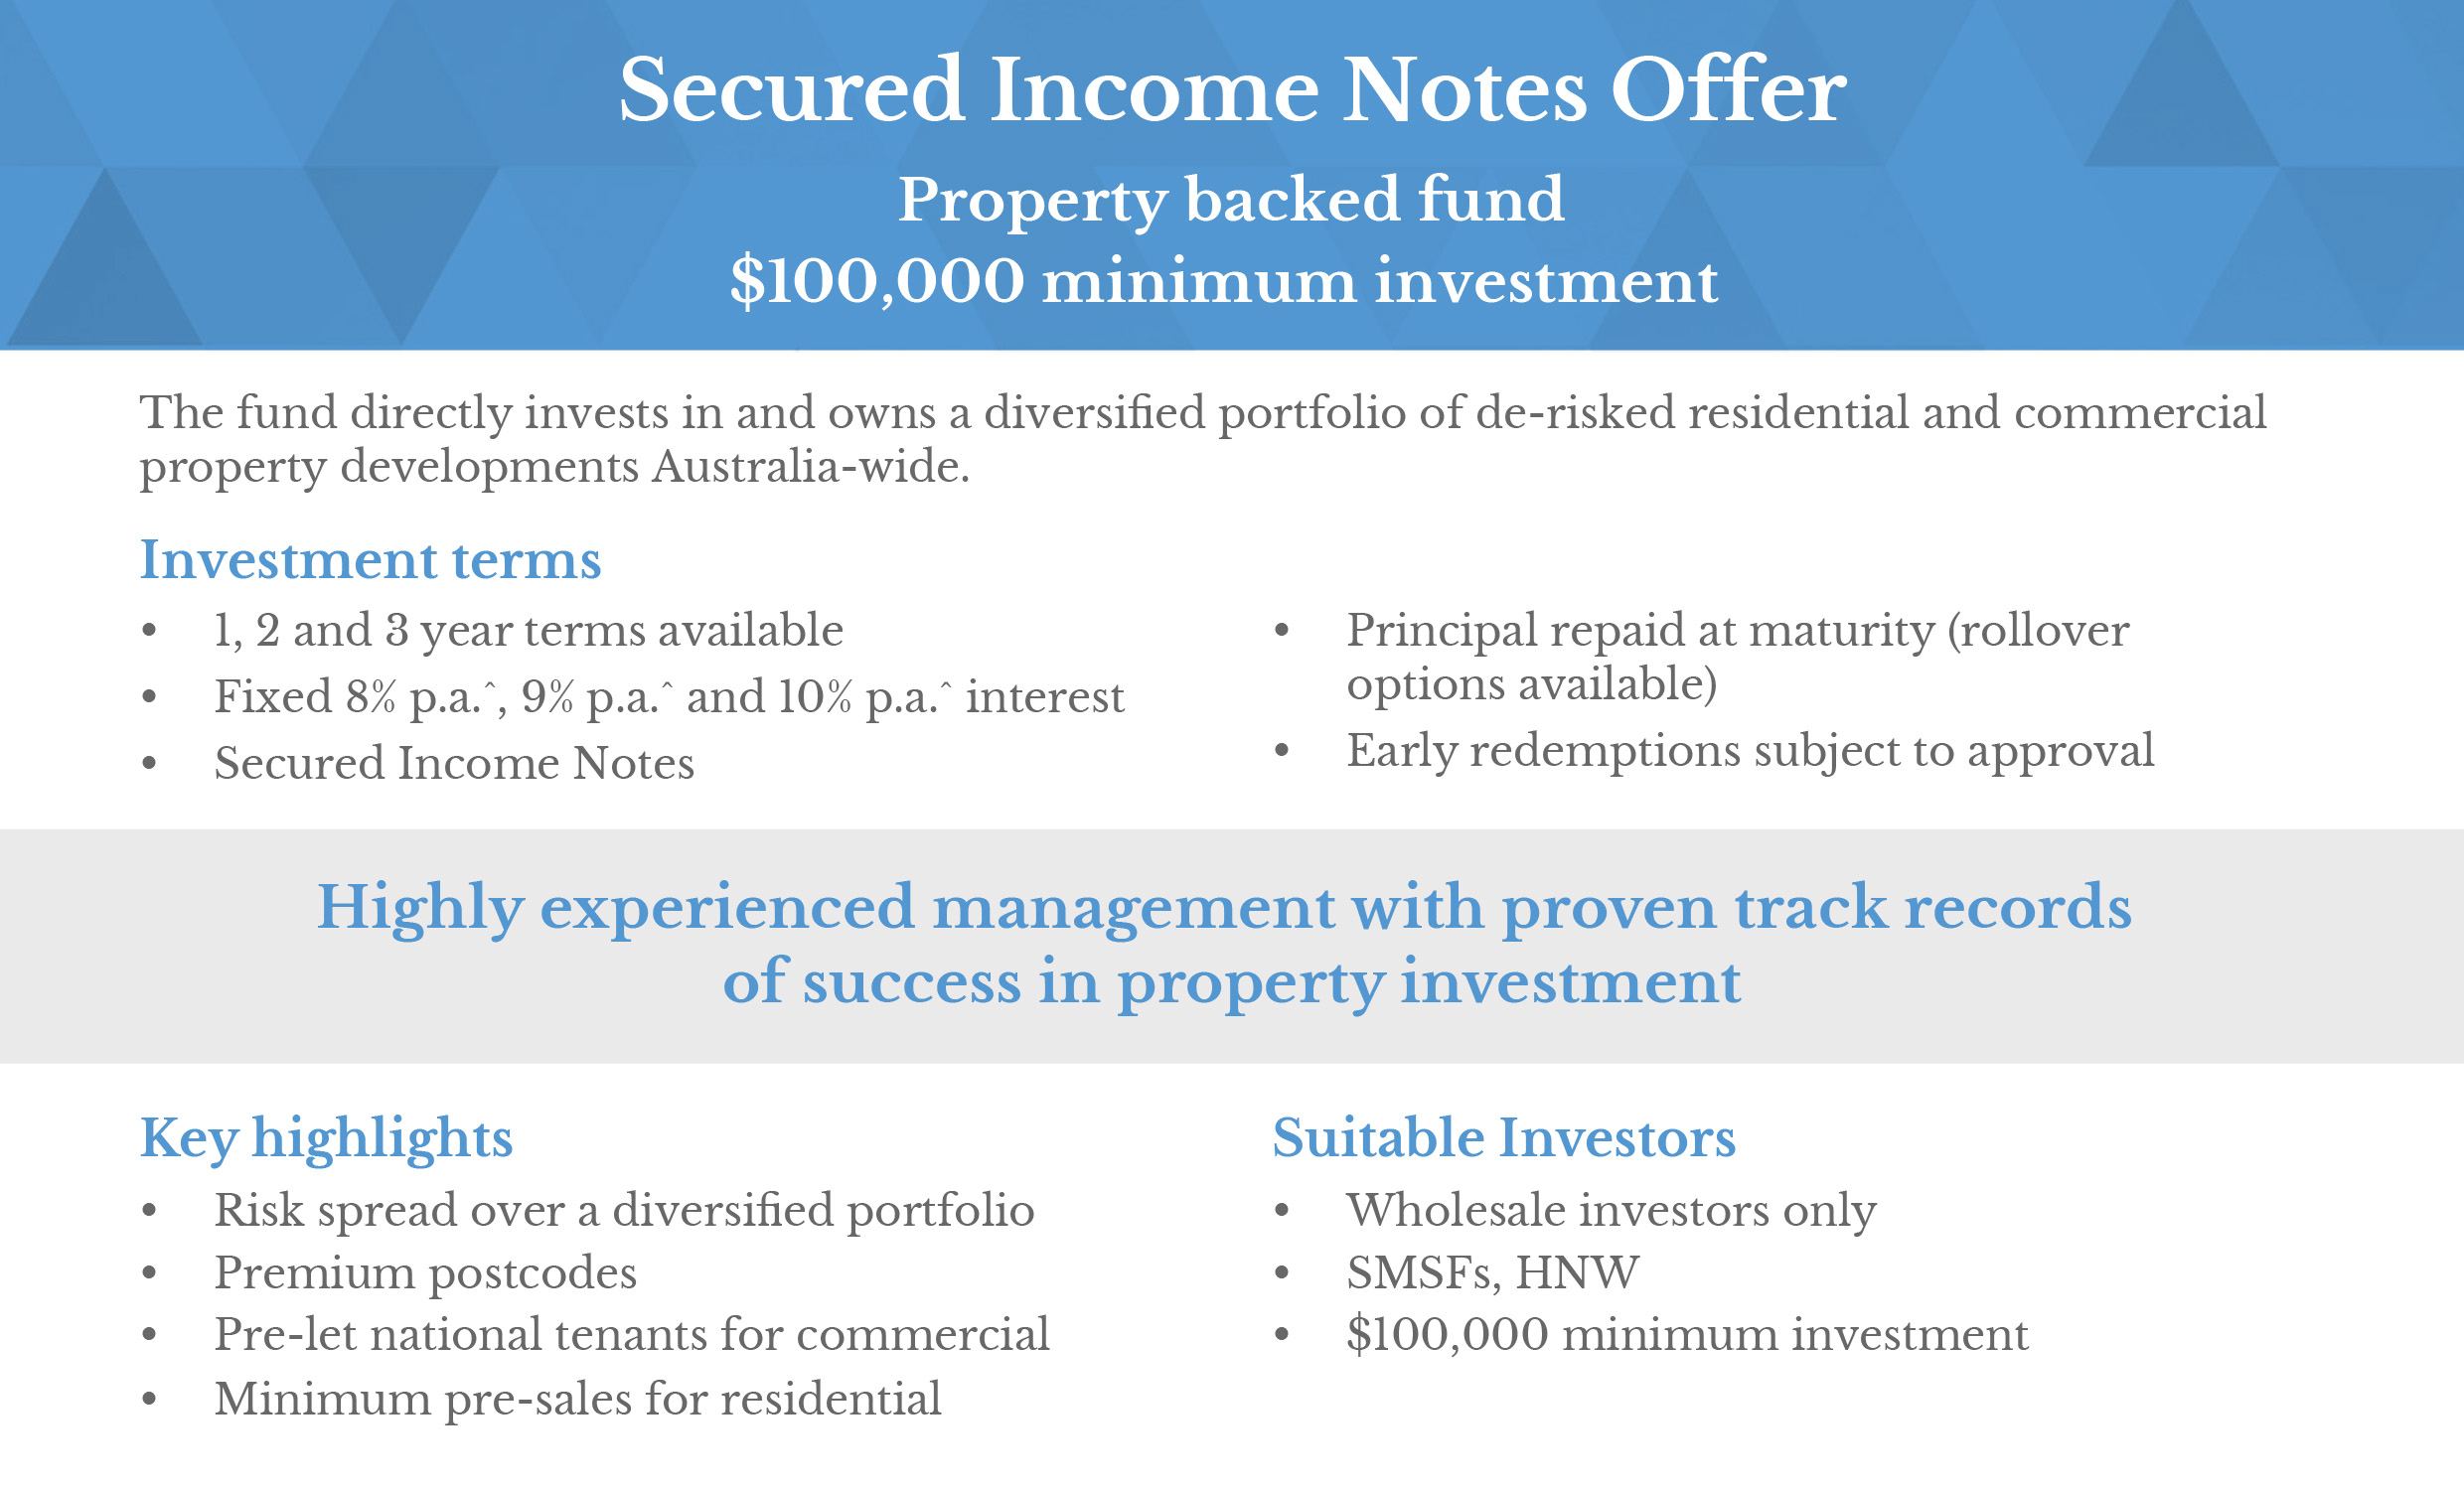 Secured Income Notes Offer Property backed fund $100,000 minimum investment The fund directly invests in and owns a diversified portfolio of de-risked residential and commercial property developments Australia-wide. Investment terms • 1, 2 and 3 year terms available • Fixed 8% p.a."', 9% p.a." and 10% p.a." interest • Secured Income Notes • Principal repaid at maturity (rollover options available) • Early redemptions subject Highly experienced management with proven track records of success in property investment Key highlights • Risk spread over a diversified portfolio Premium postcodes Pre-let national tenants for commercial Minimum pre-sales for residential Suitable Investors • Wholesale investors only • SMSFs, HNW • $100,000 minimum investment